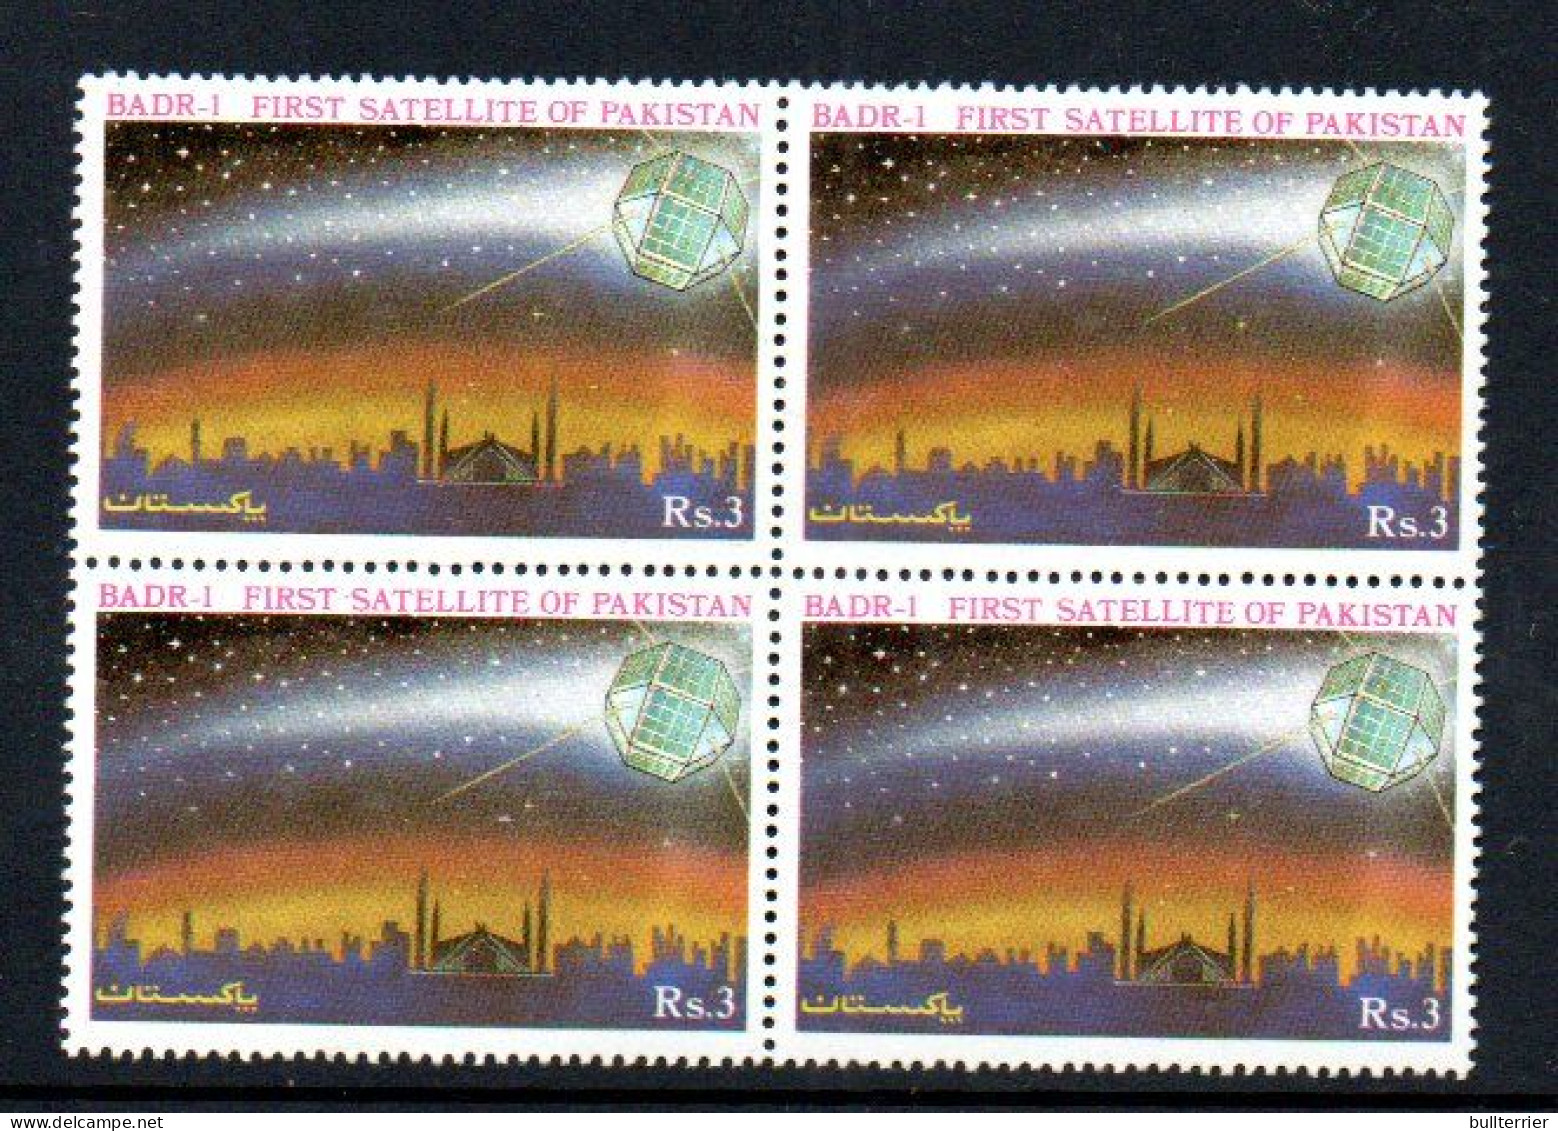 SPACE - PAKISTAN - 1990 - LAUNCHING OF BADR 1 FIRST SATELLITTEE BLOCK OF 4  MINT NEVER HINGED, SG CAT £14 - Azië